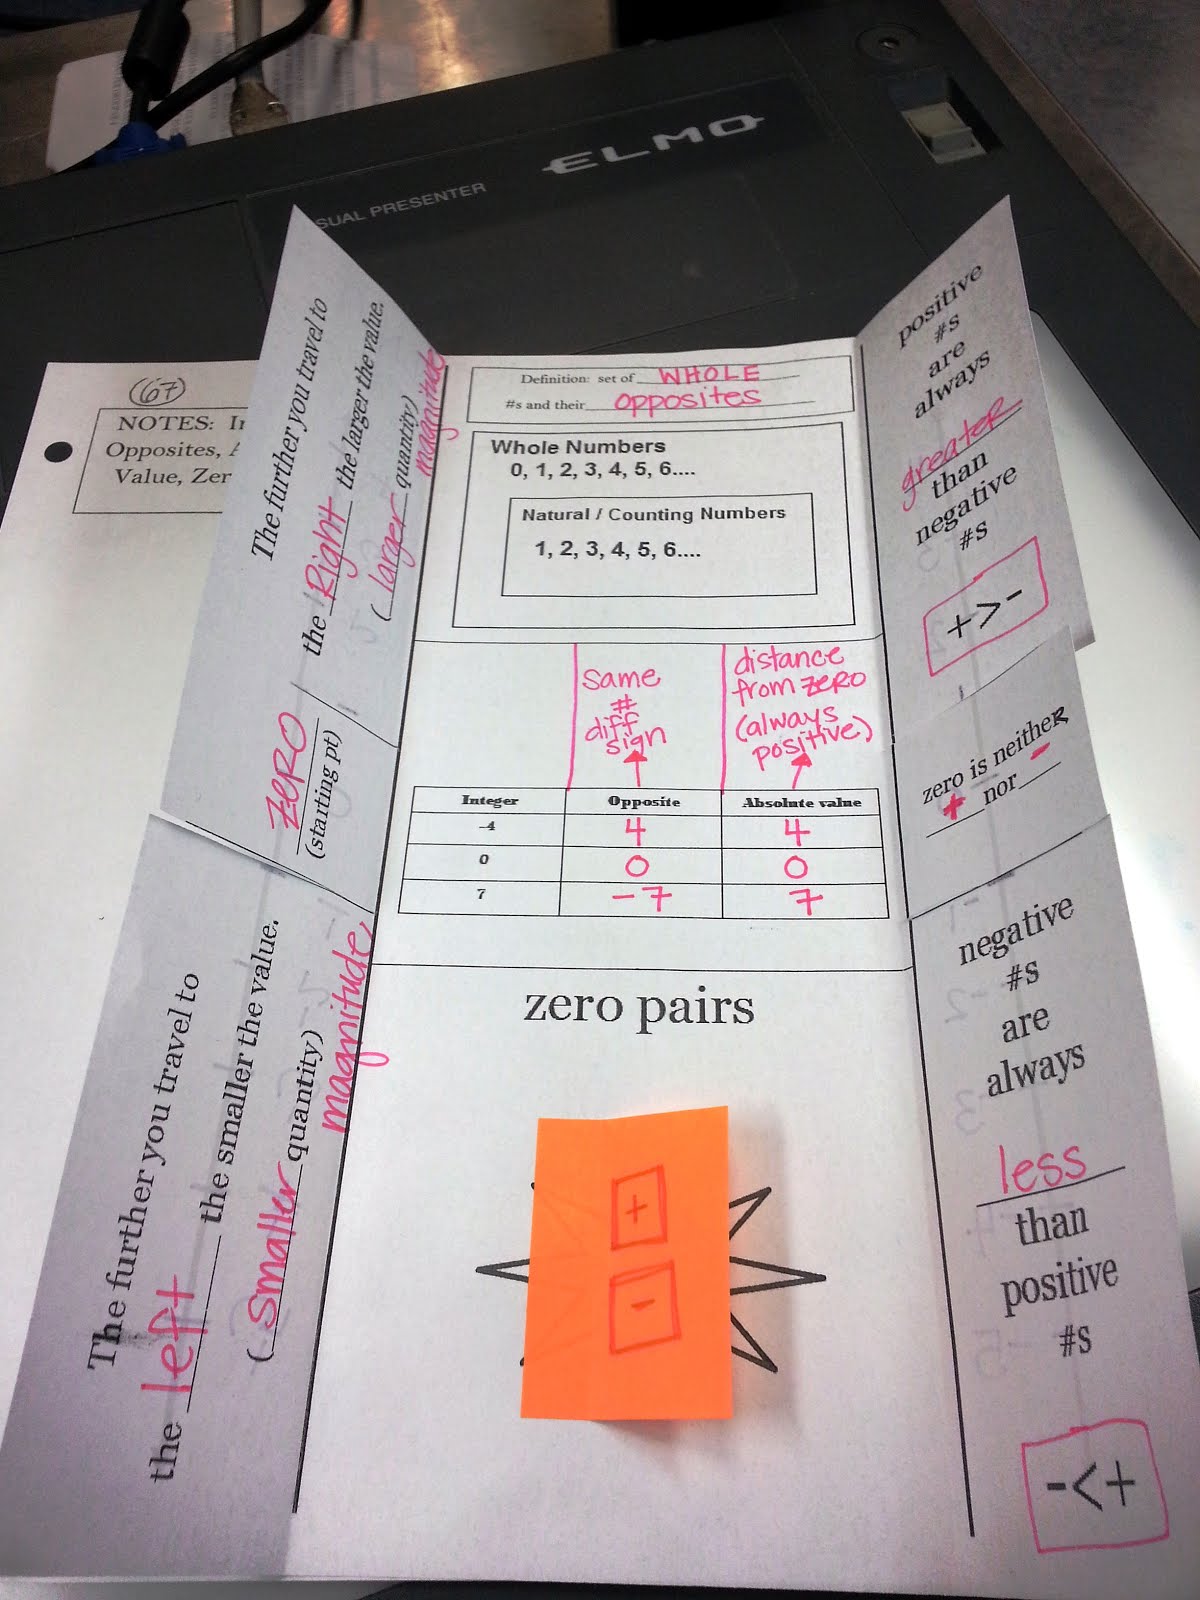 I've got a foldable for that!: integers, absolute value, zero pairs